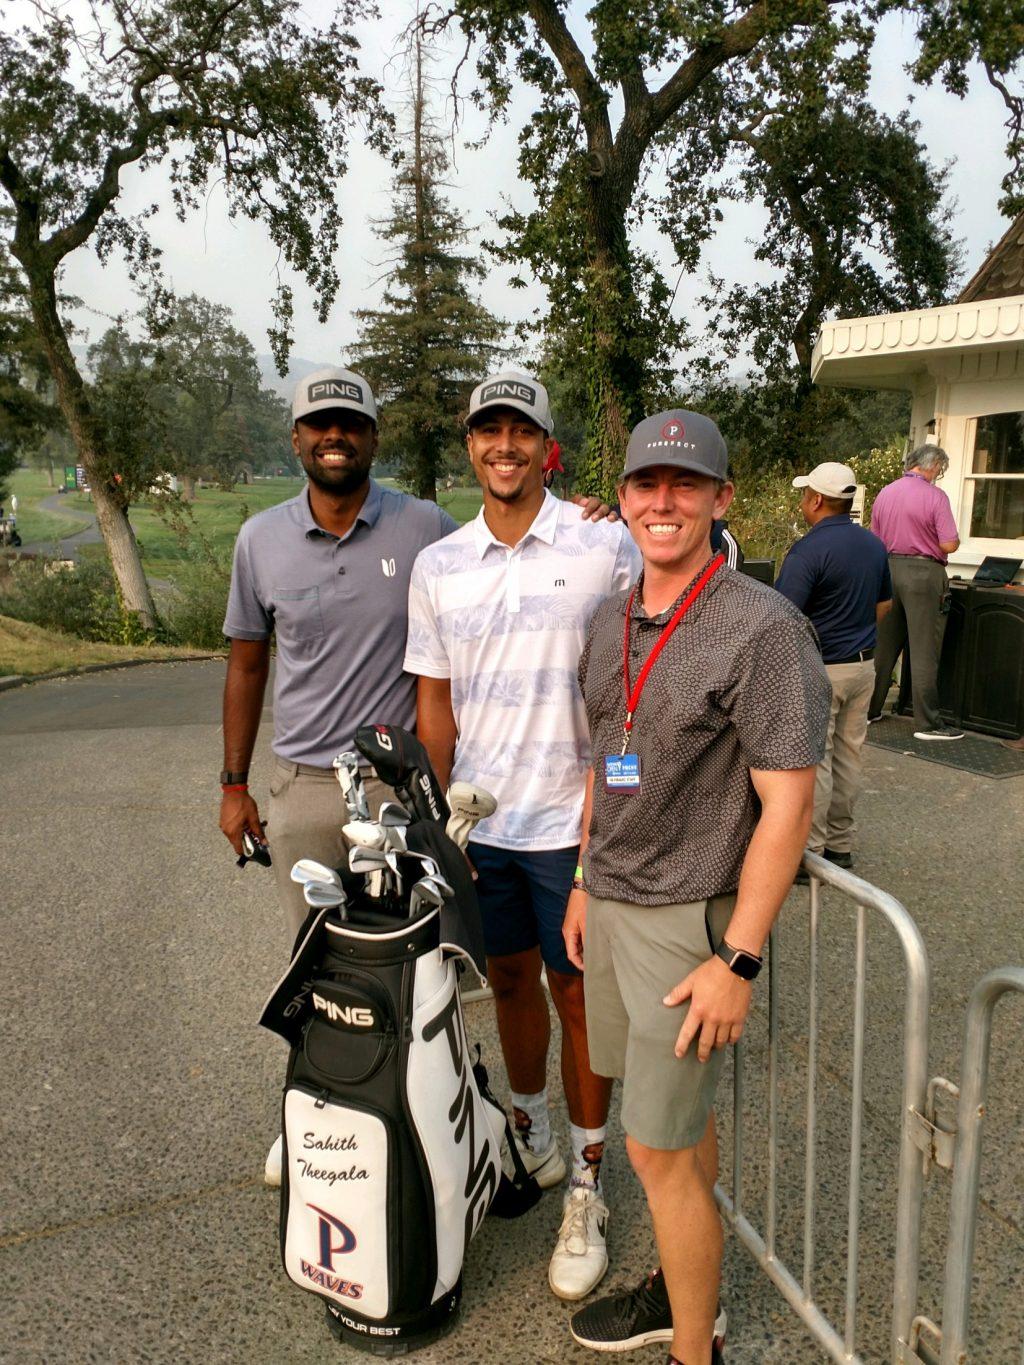 Theegala hangs out with his caddie, Aaron, and friend, Zack, at the Silverado Country Club in Napa Valley, CA. The golfer traveled 400 miles from his home in Chino, CA, to compete at this tournament.